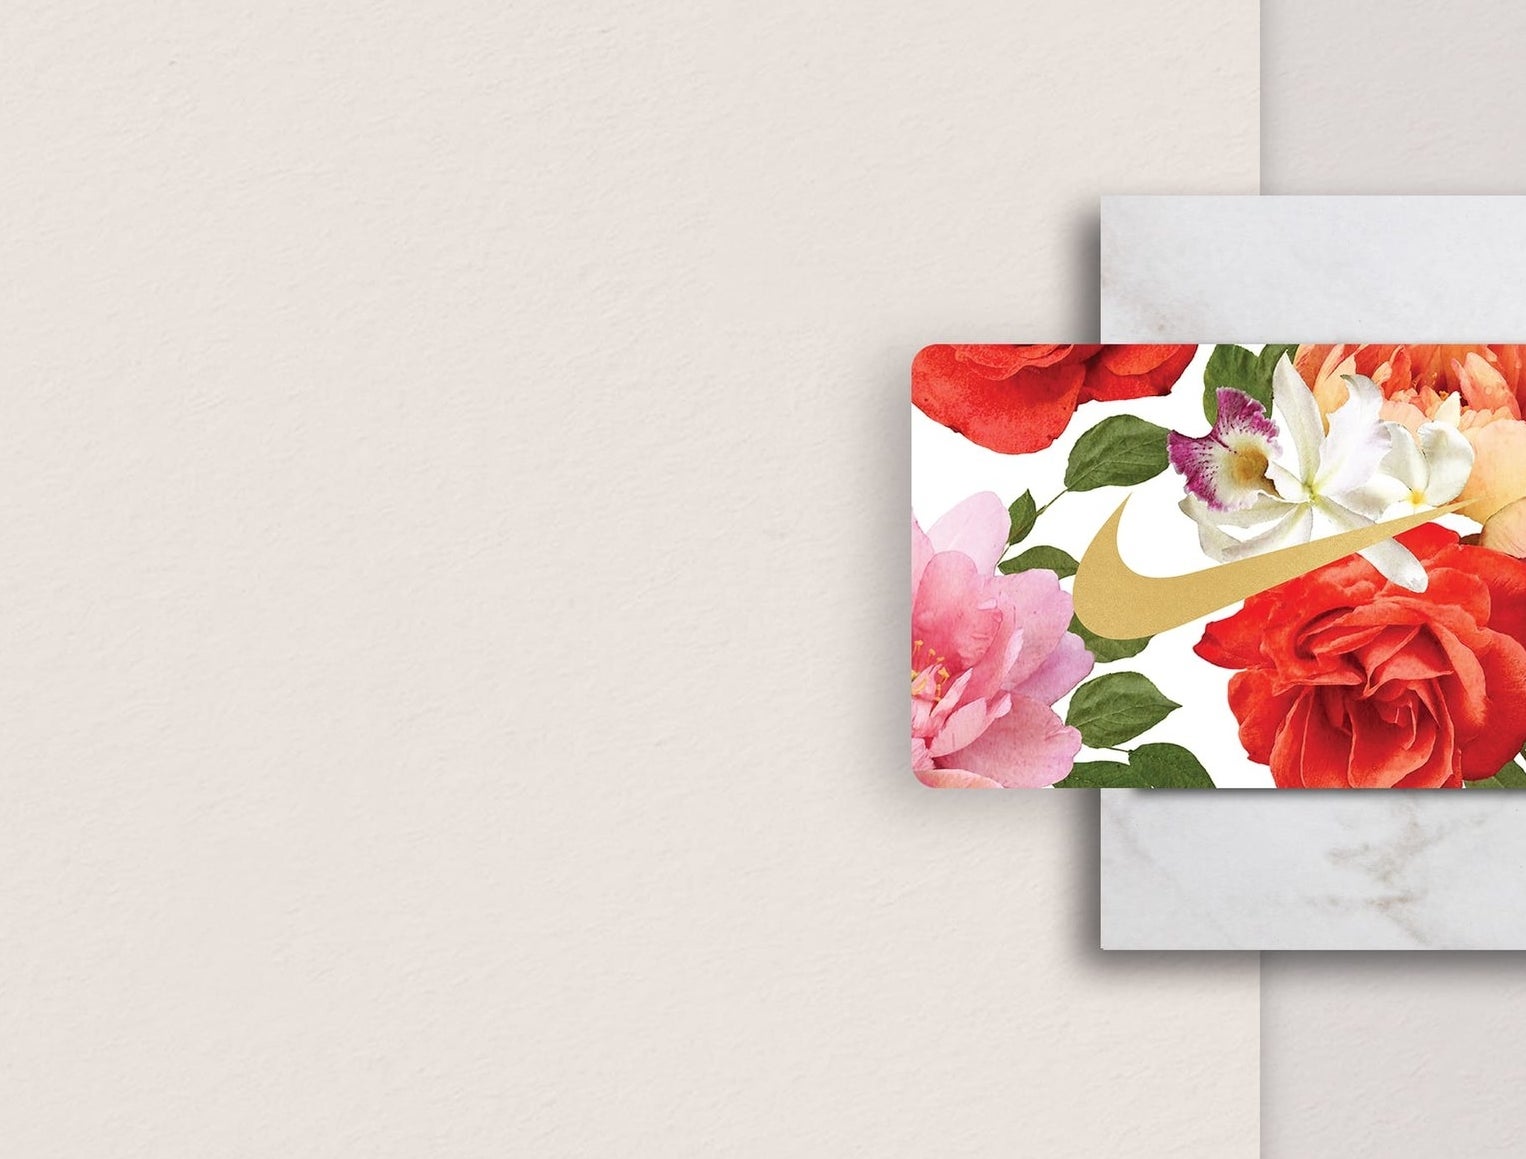 A floral Nike gift card